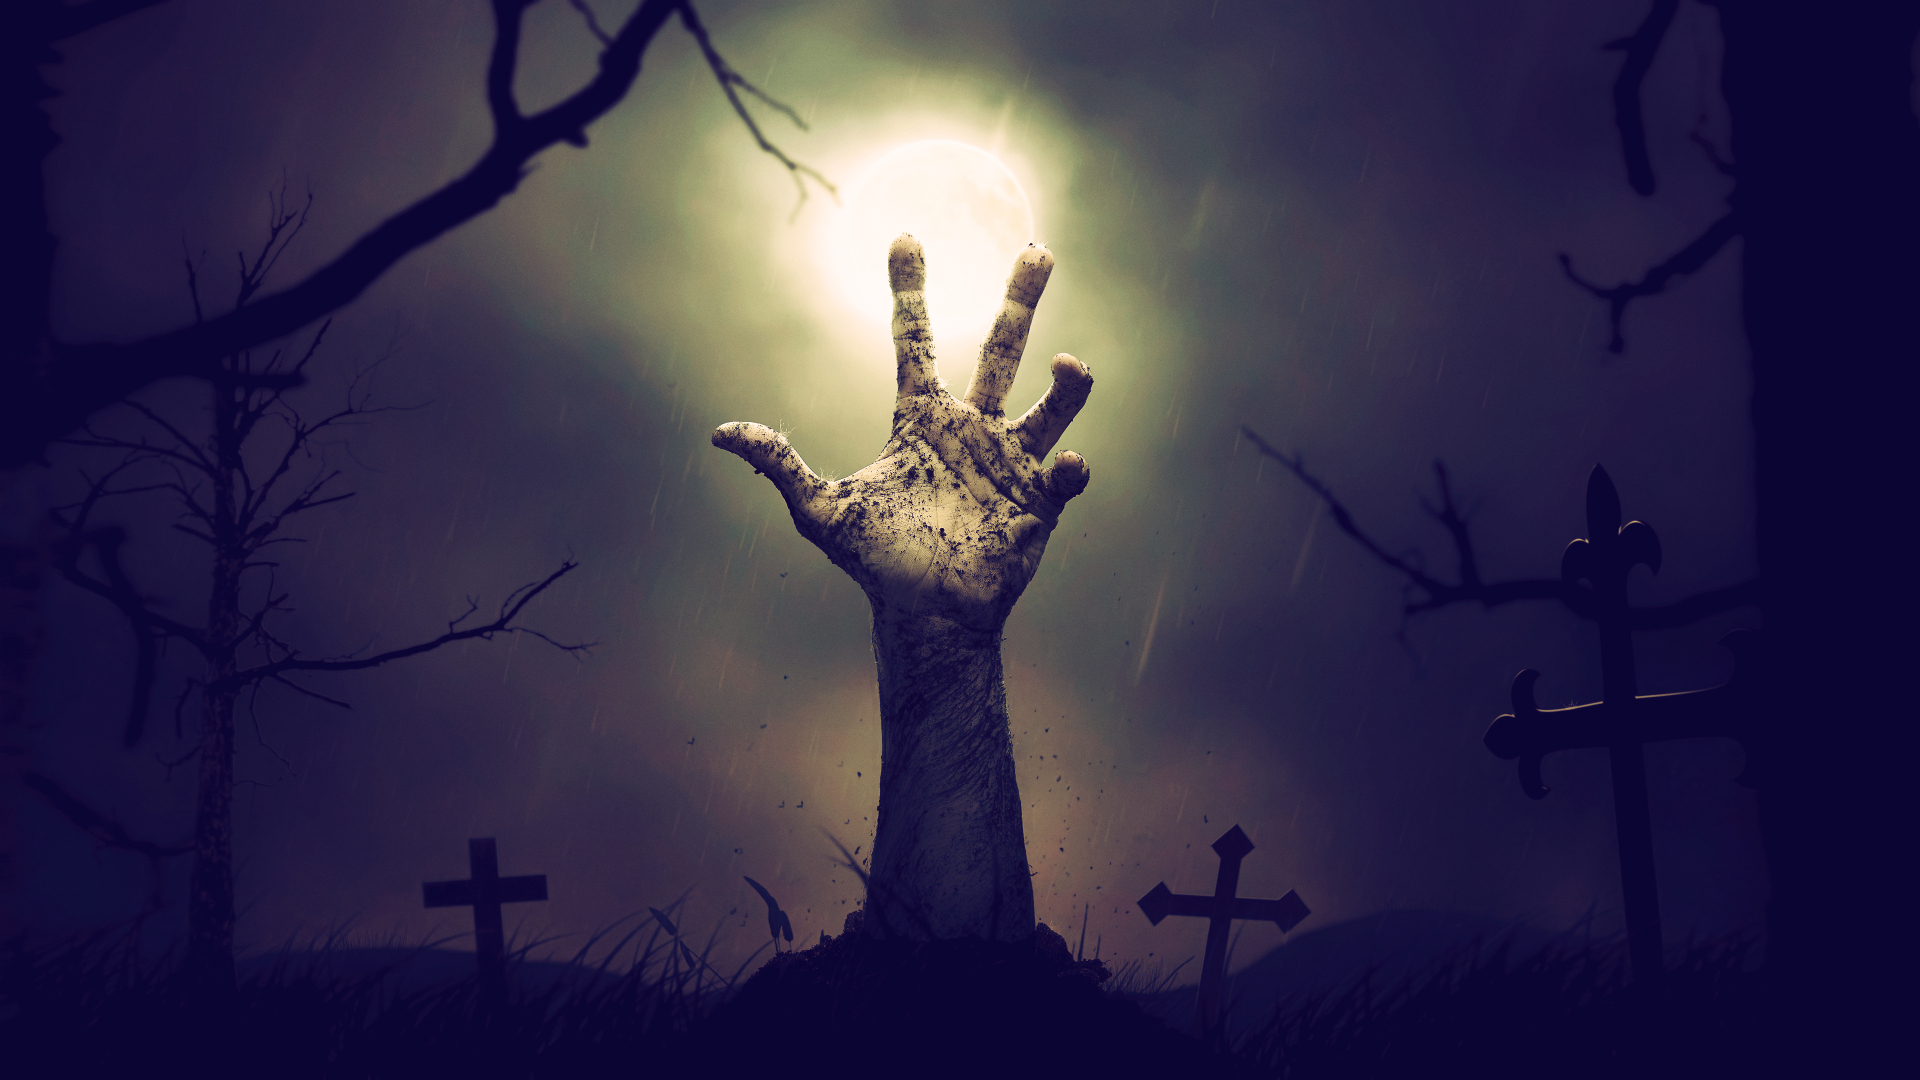 1920x1080 Zombie Hand From Cemetery 1080P Laptop Full HD Wallpaper, HD ...